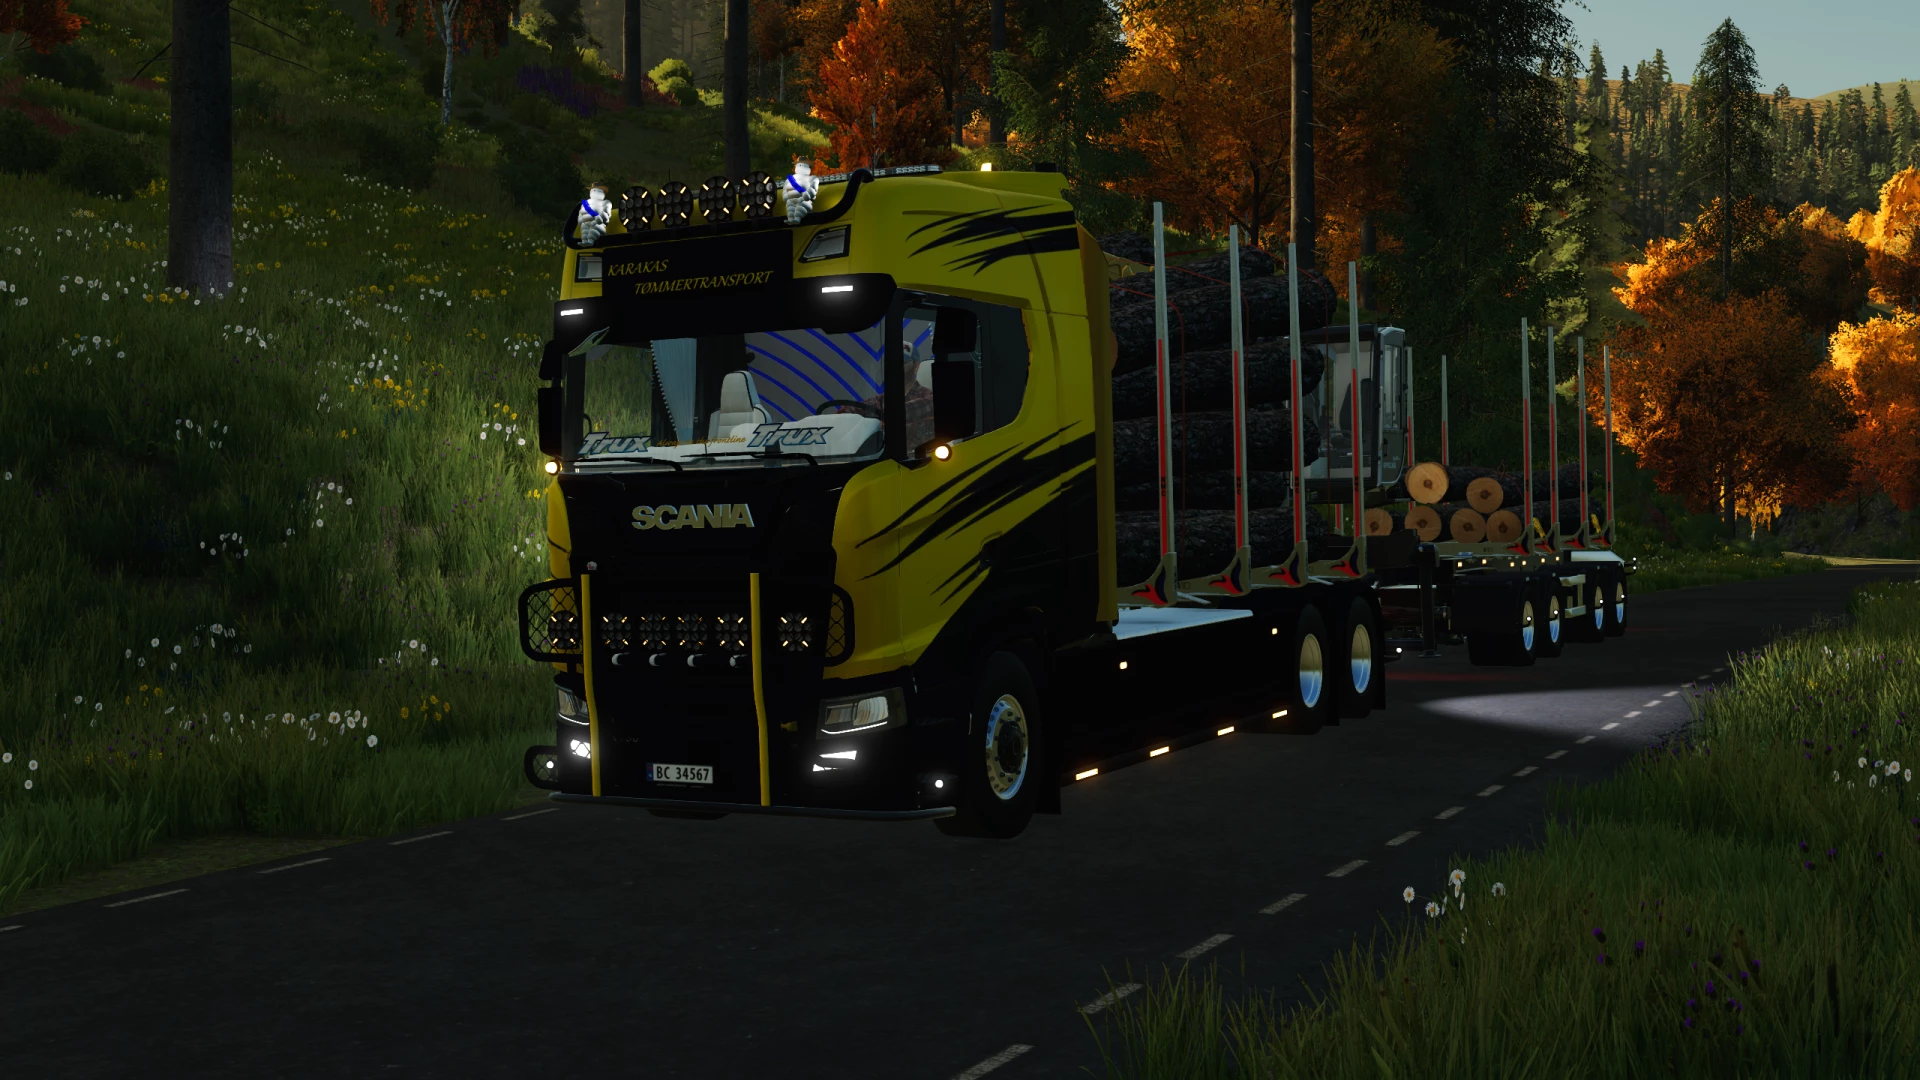 My new timber truck